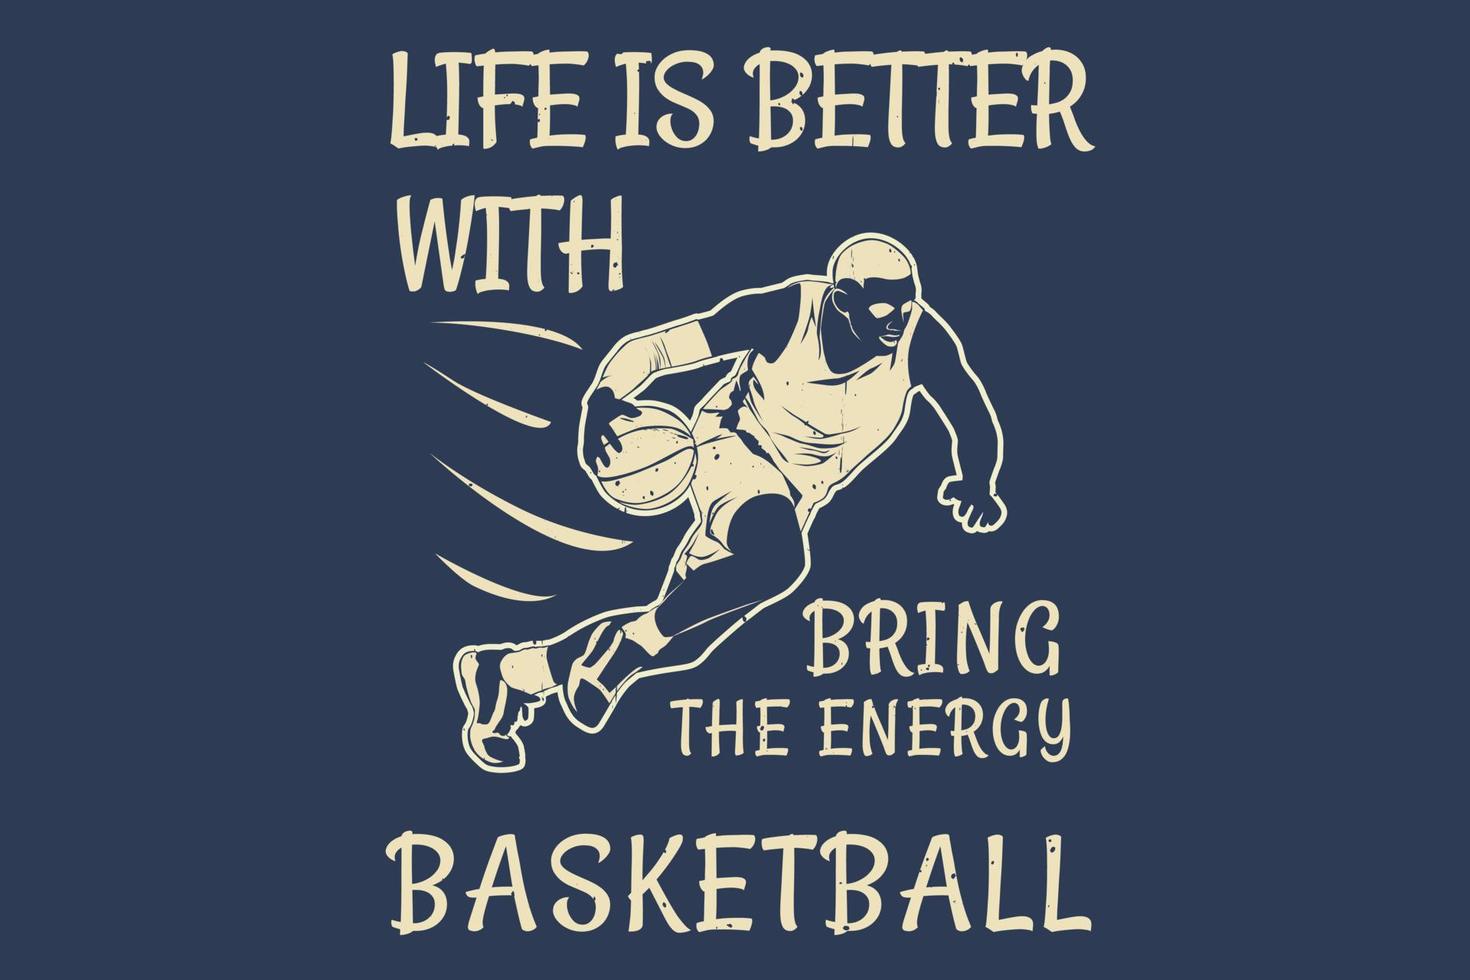 Life is better with basketball silhouette design vector